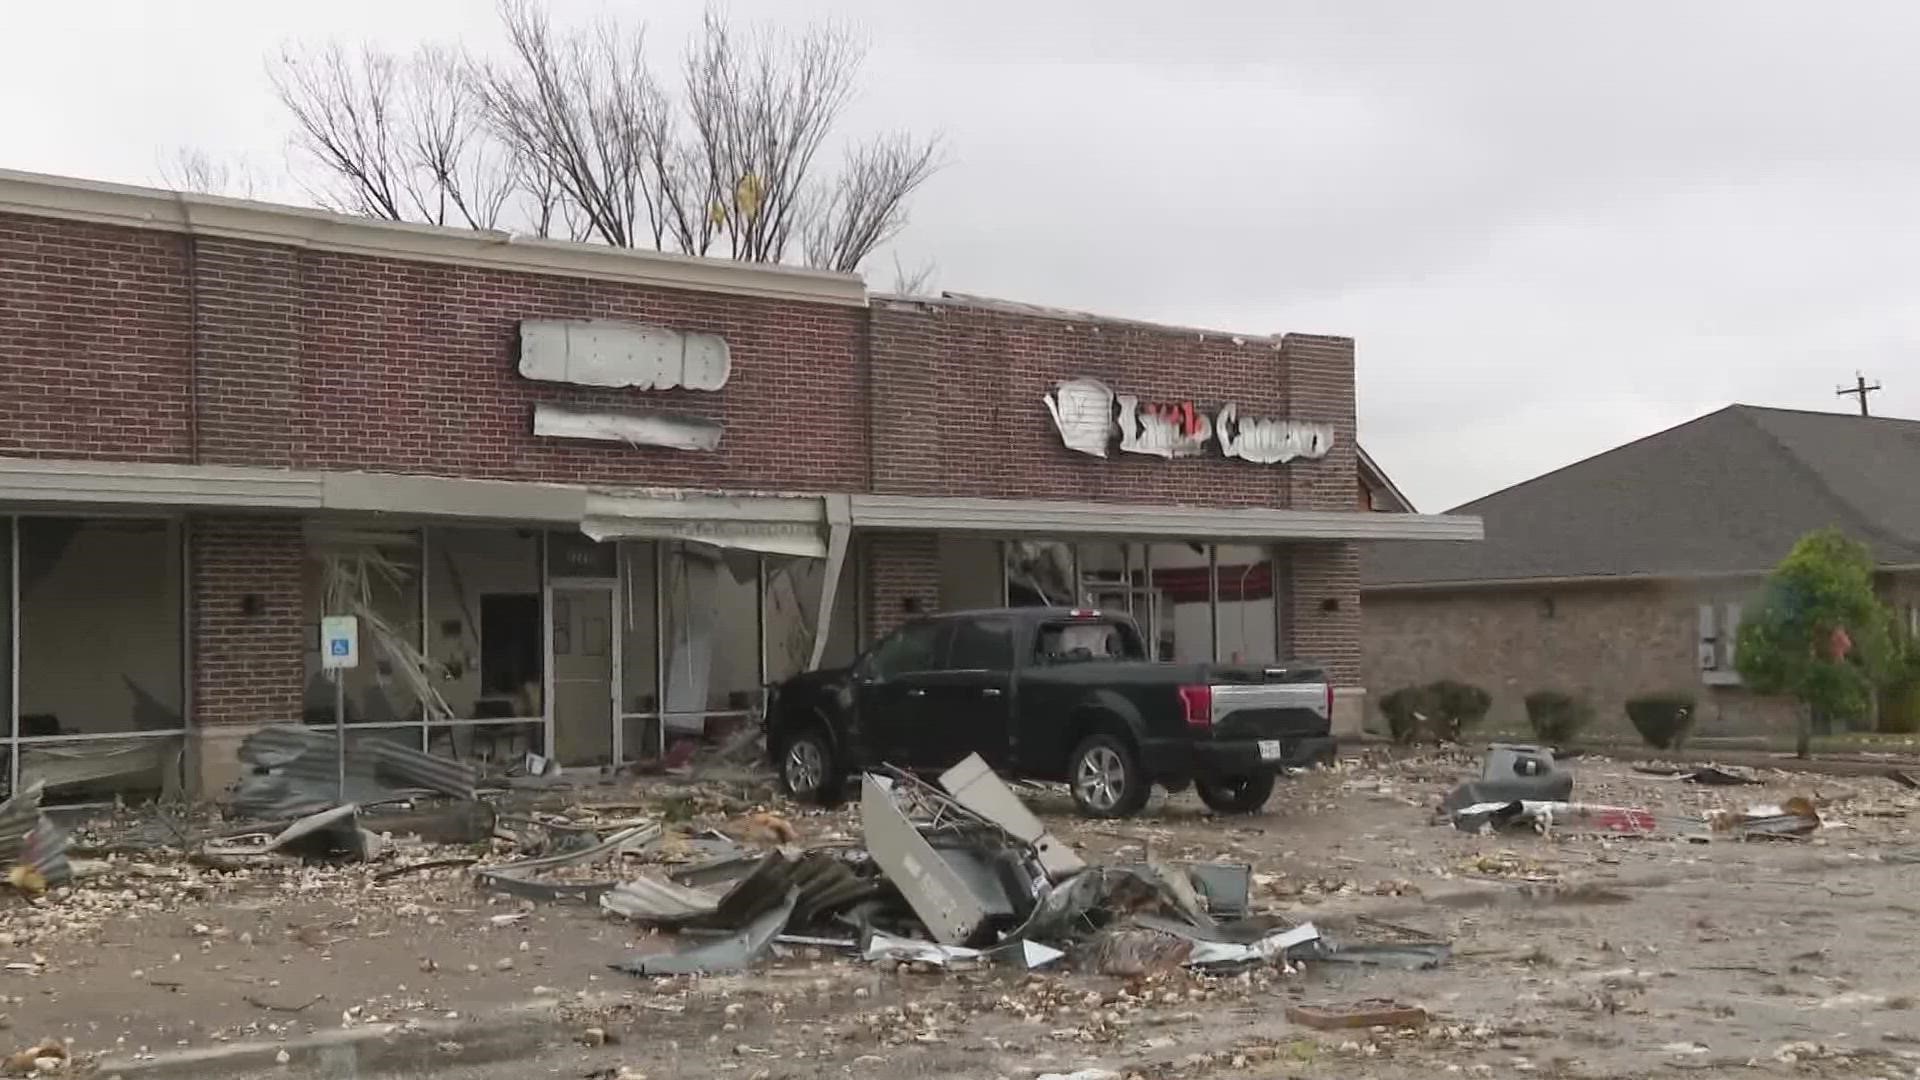 Homes and businesses were destroyed, but somehow no one was seriously injured when a tornado passed through Deer Park.